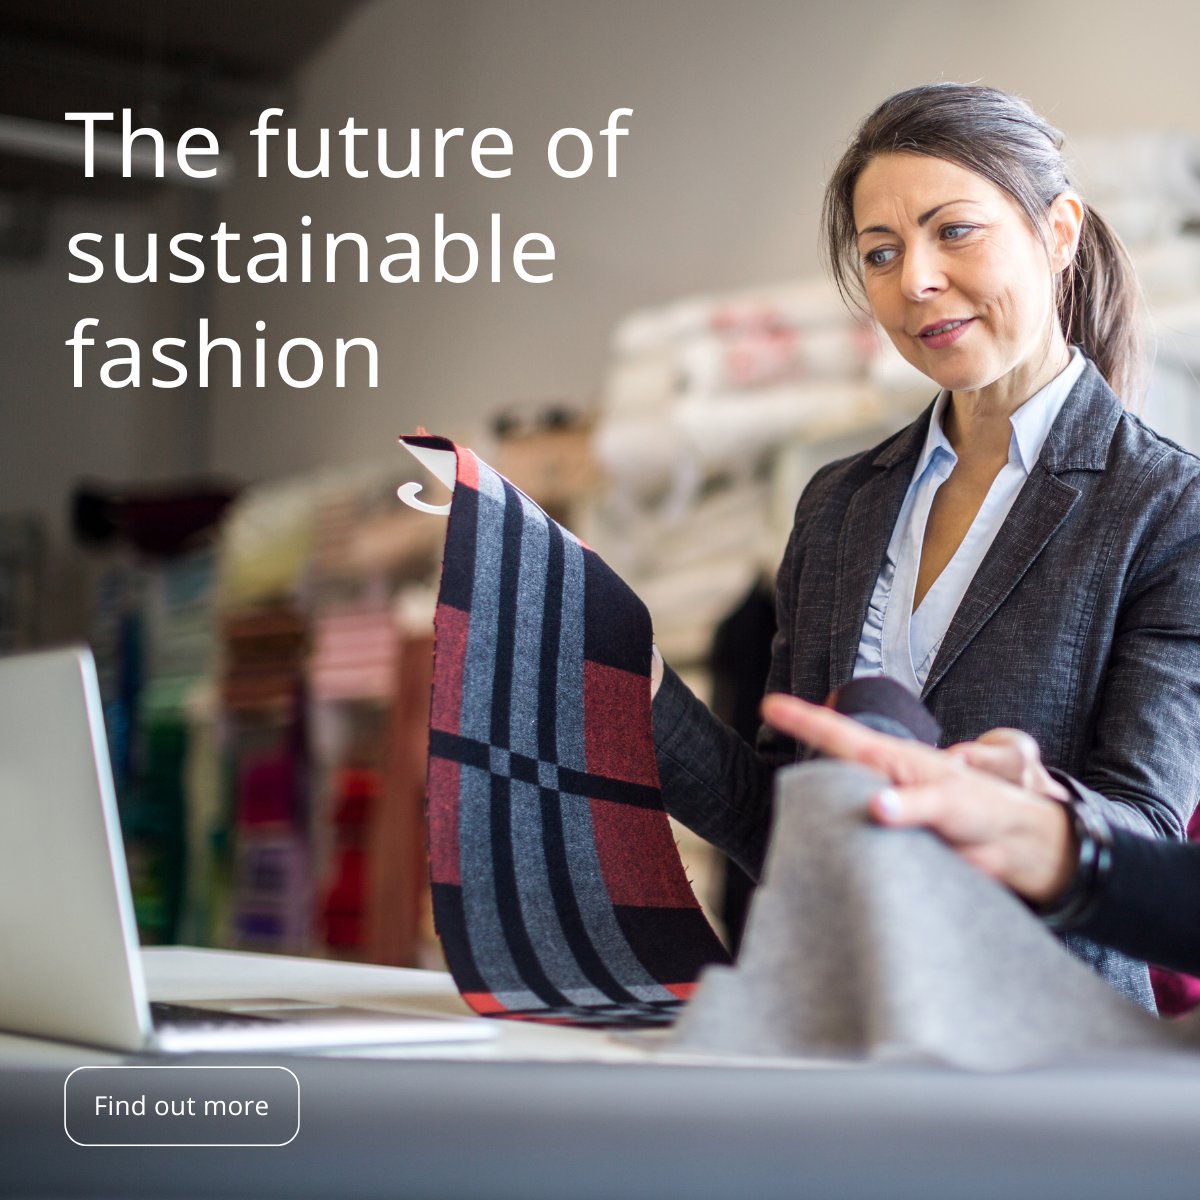 Interested in making fashion more sustainable? At BSI, we're exploring the potential of a new #SustainableFashion standard to drive lasting change. Join us for insights and find out more: bit.ly/3IpT3DY #BSIStandards #CircularEconomy